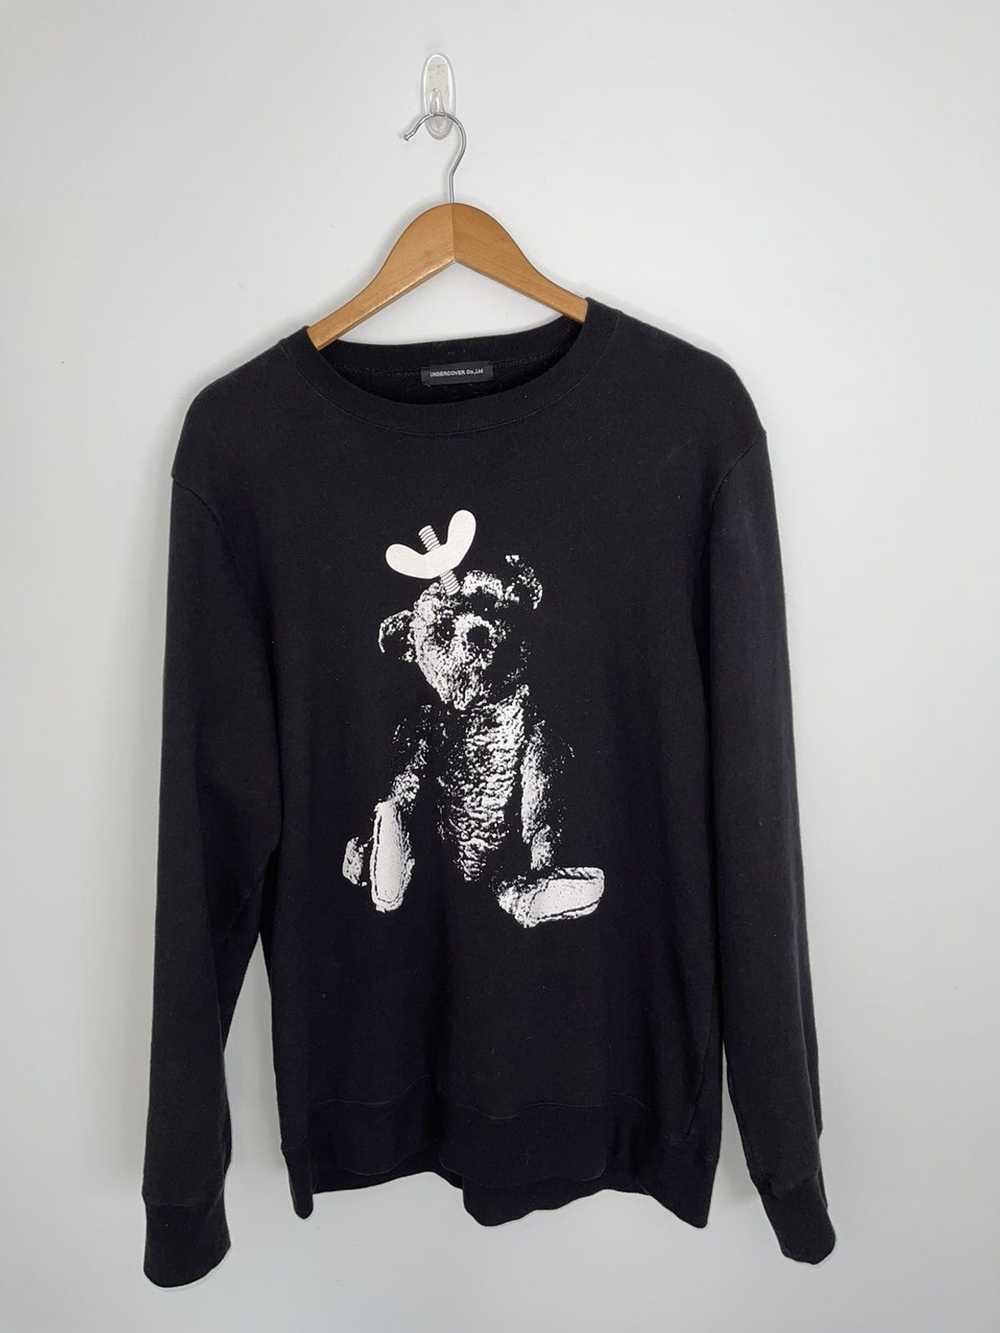 Undercover Undercover Bear sweater - image 1